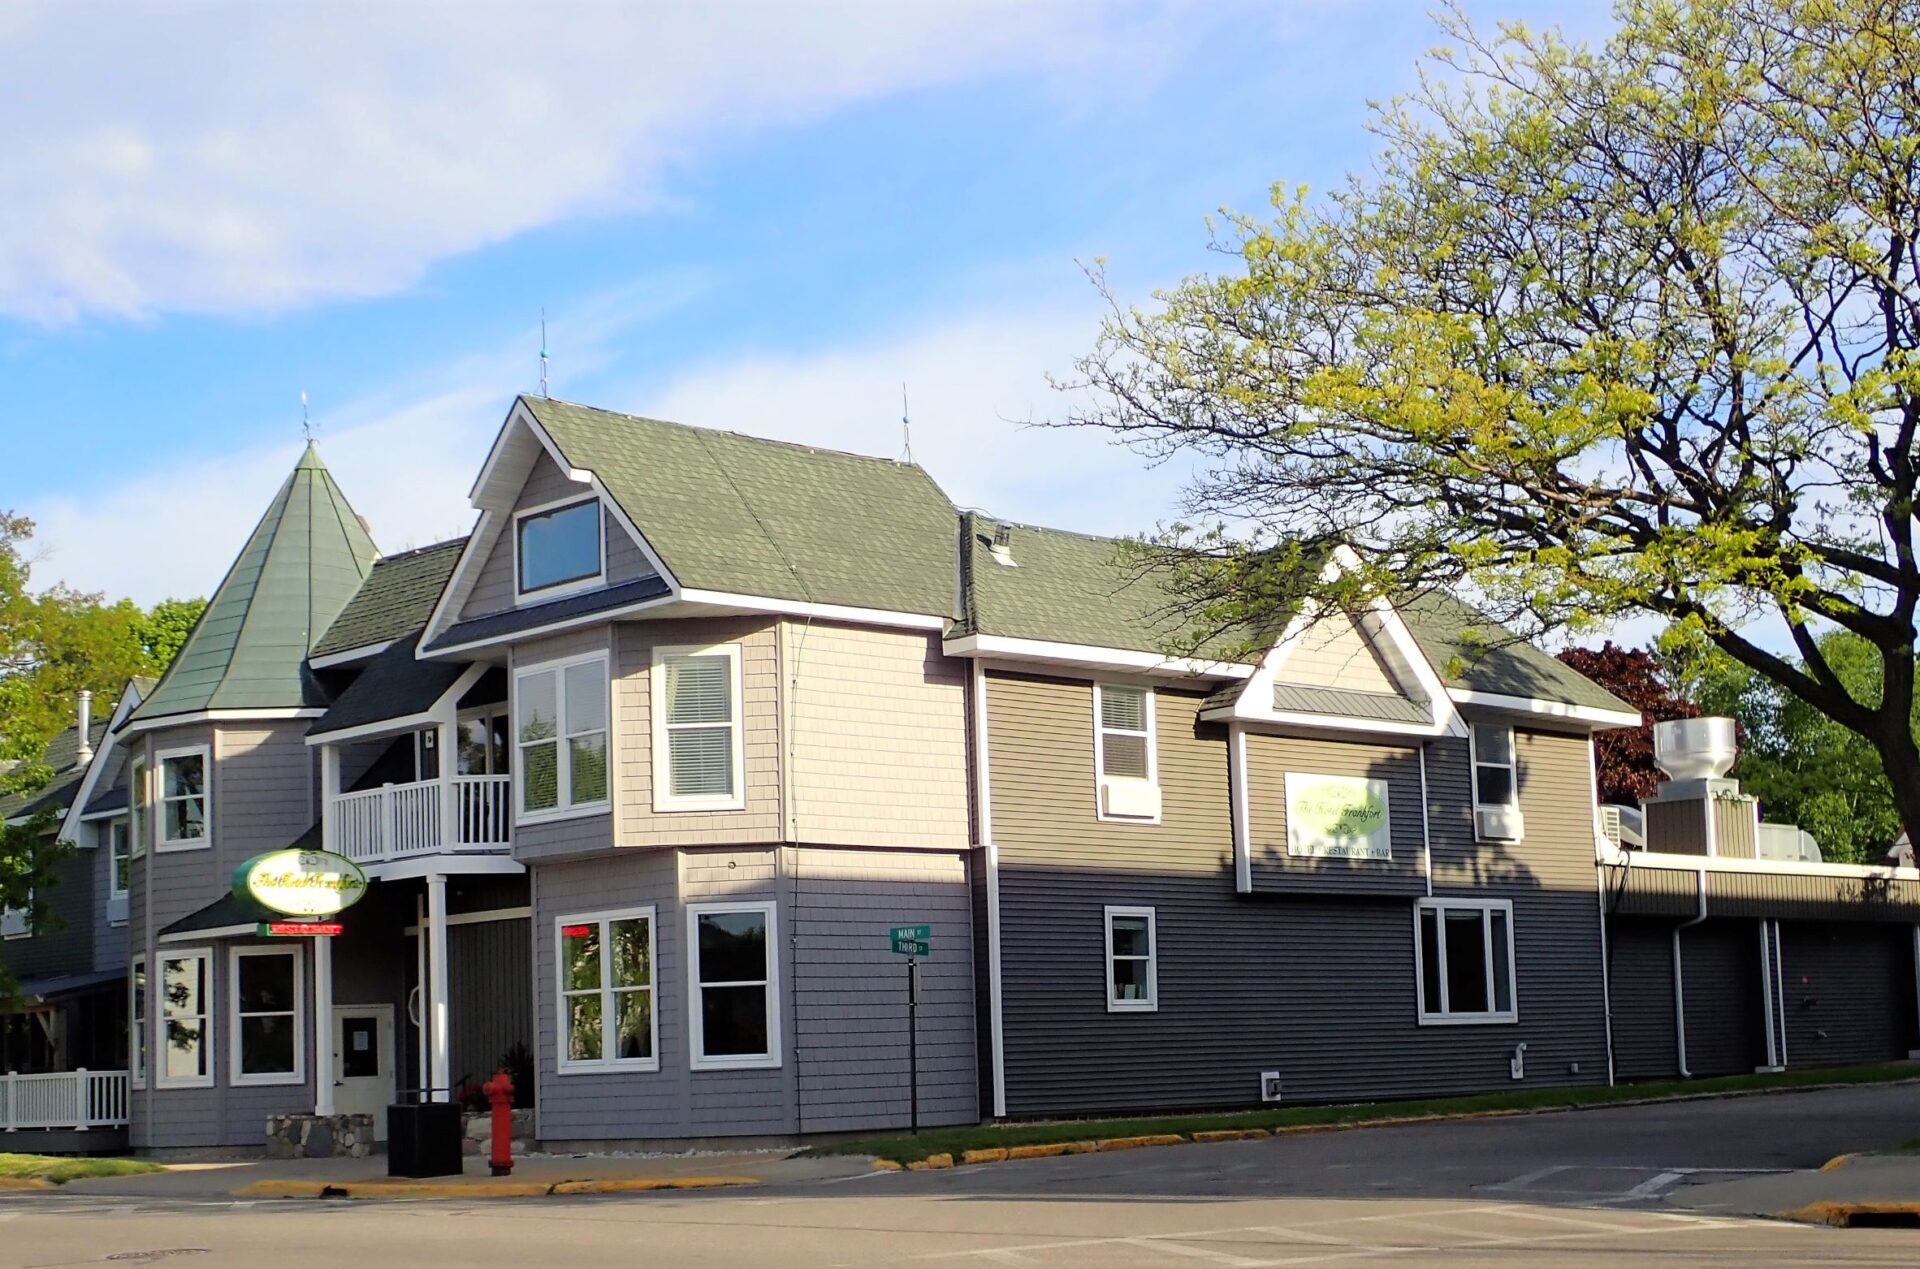 Best place to stay in Frankfort, Michigan: Hotel Frankfort